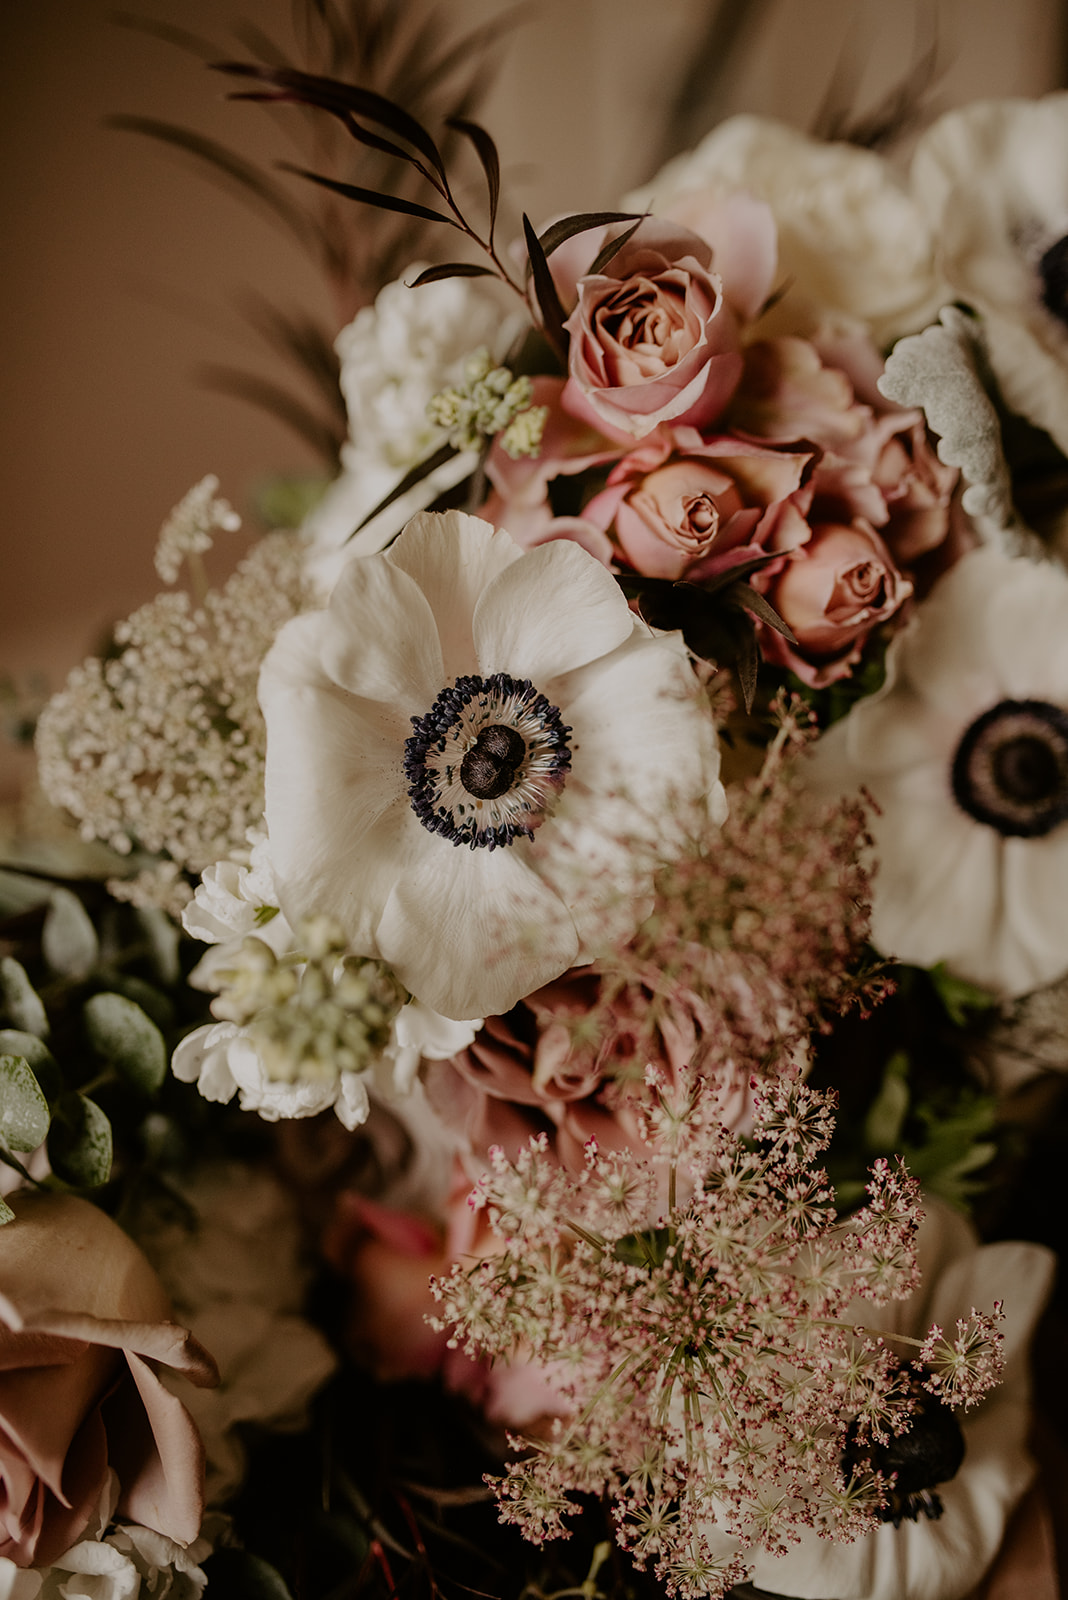 Details of the bridal bouquet with anenomes and roses